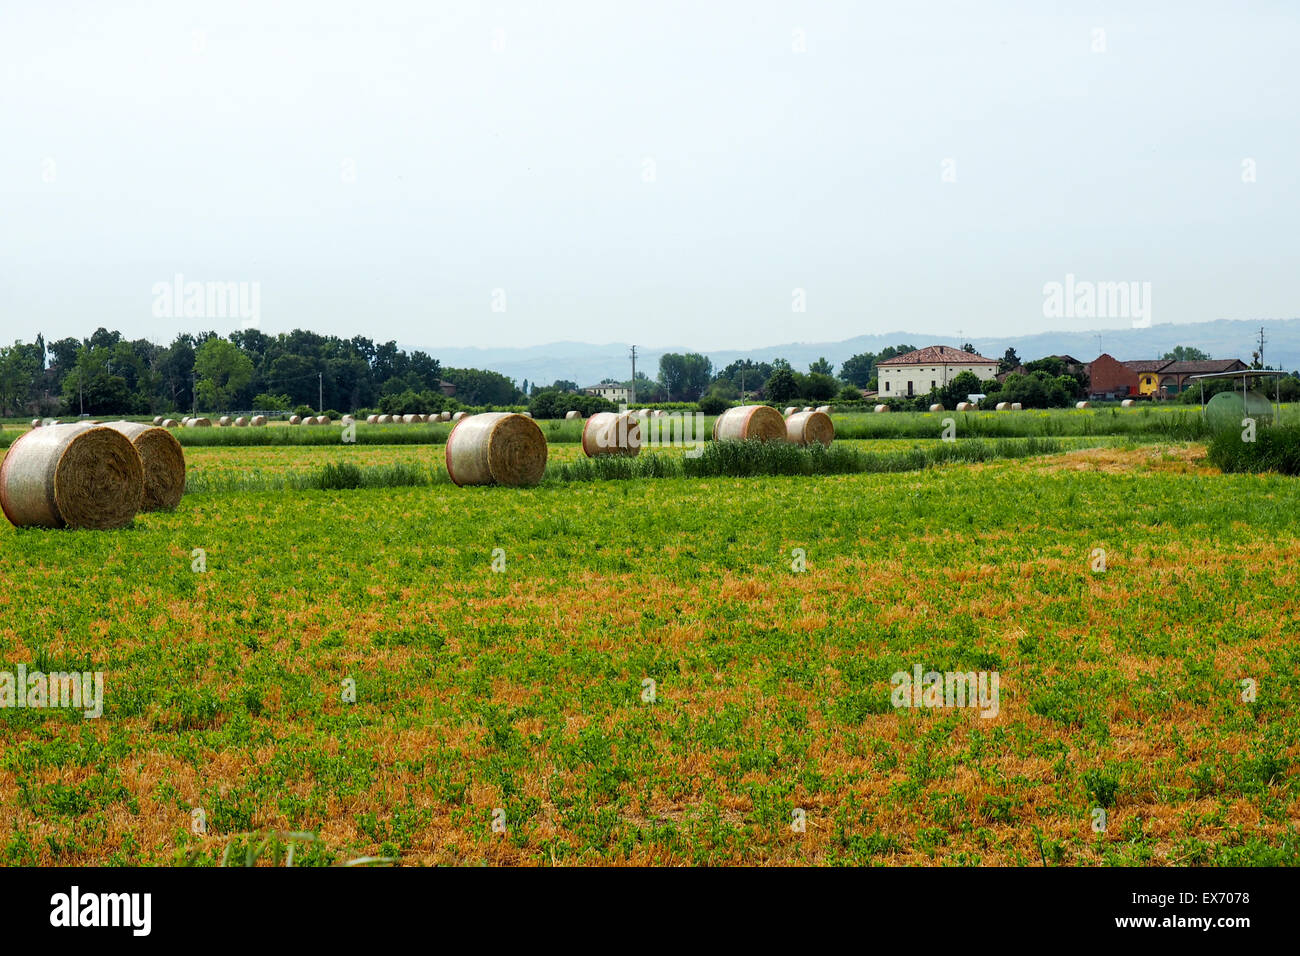 Rolled hay bales in harvested wheat field. Stock Photo